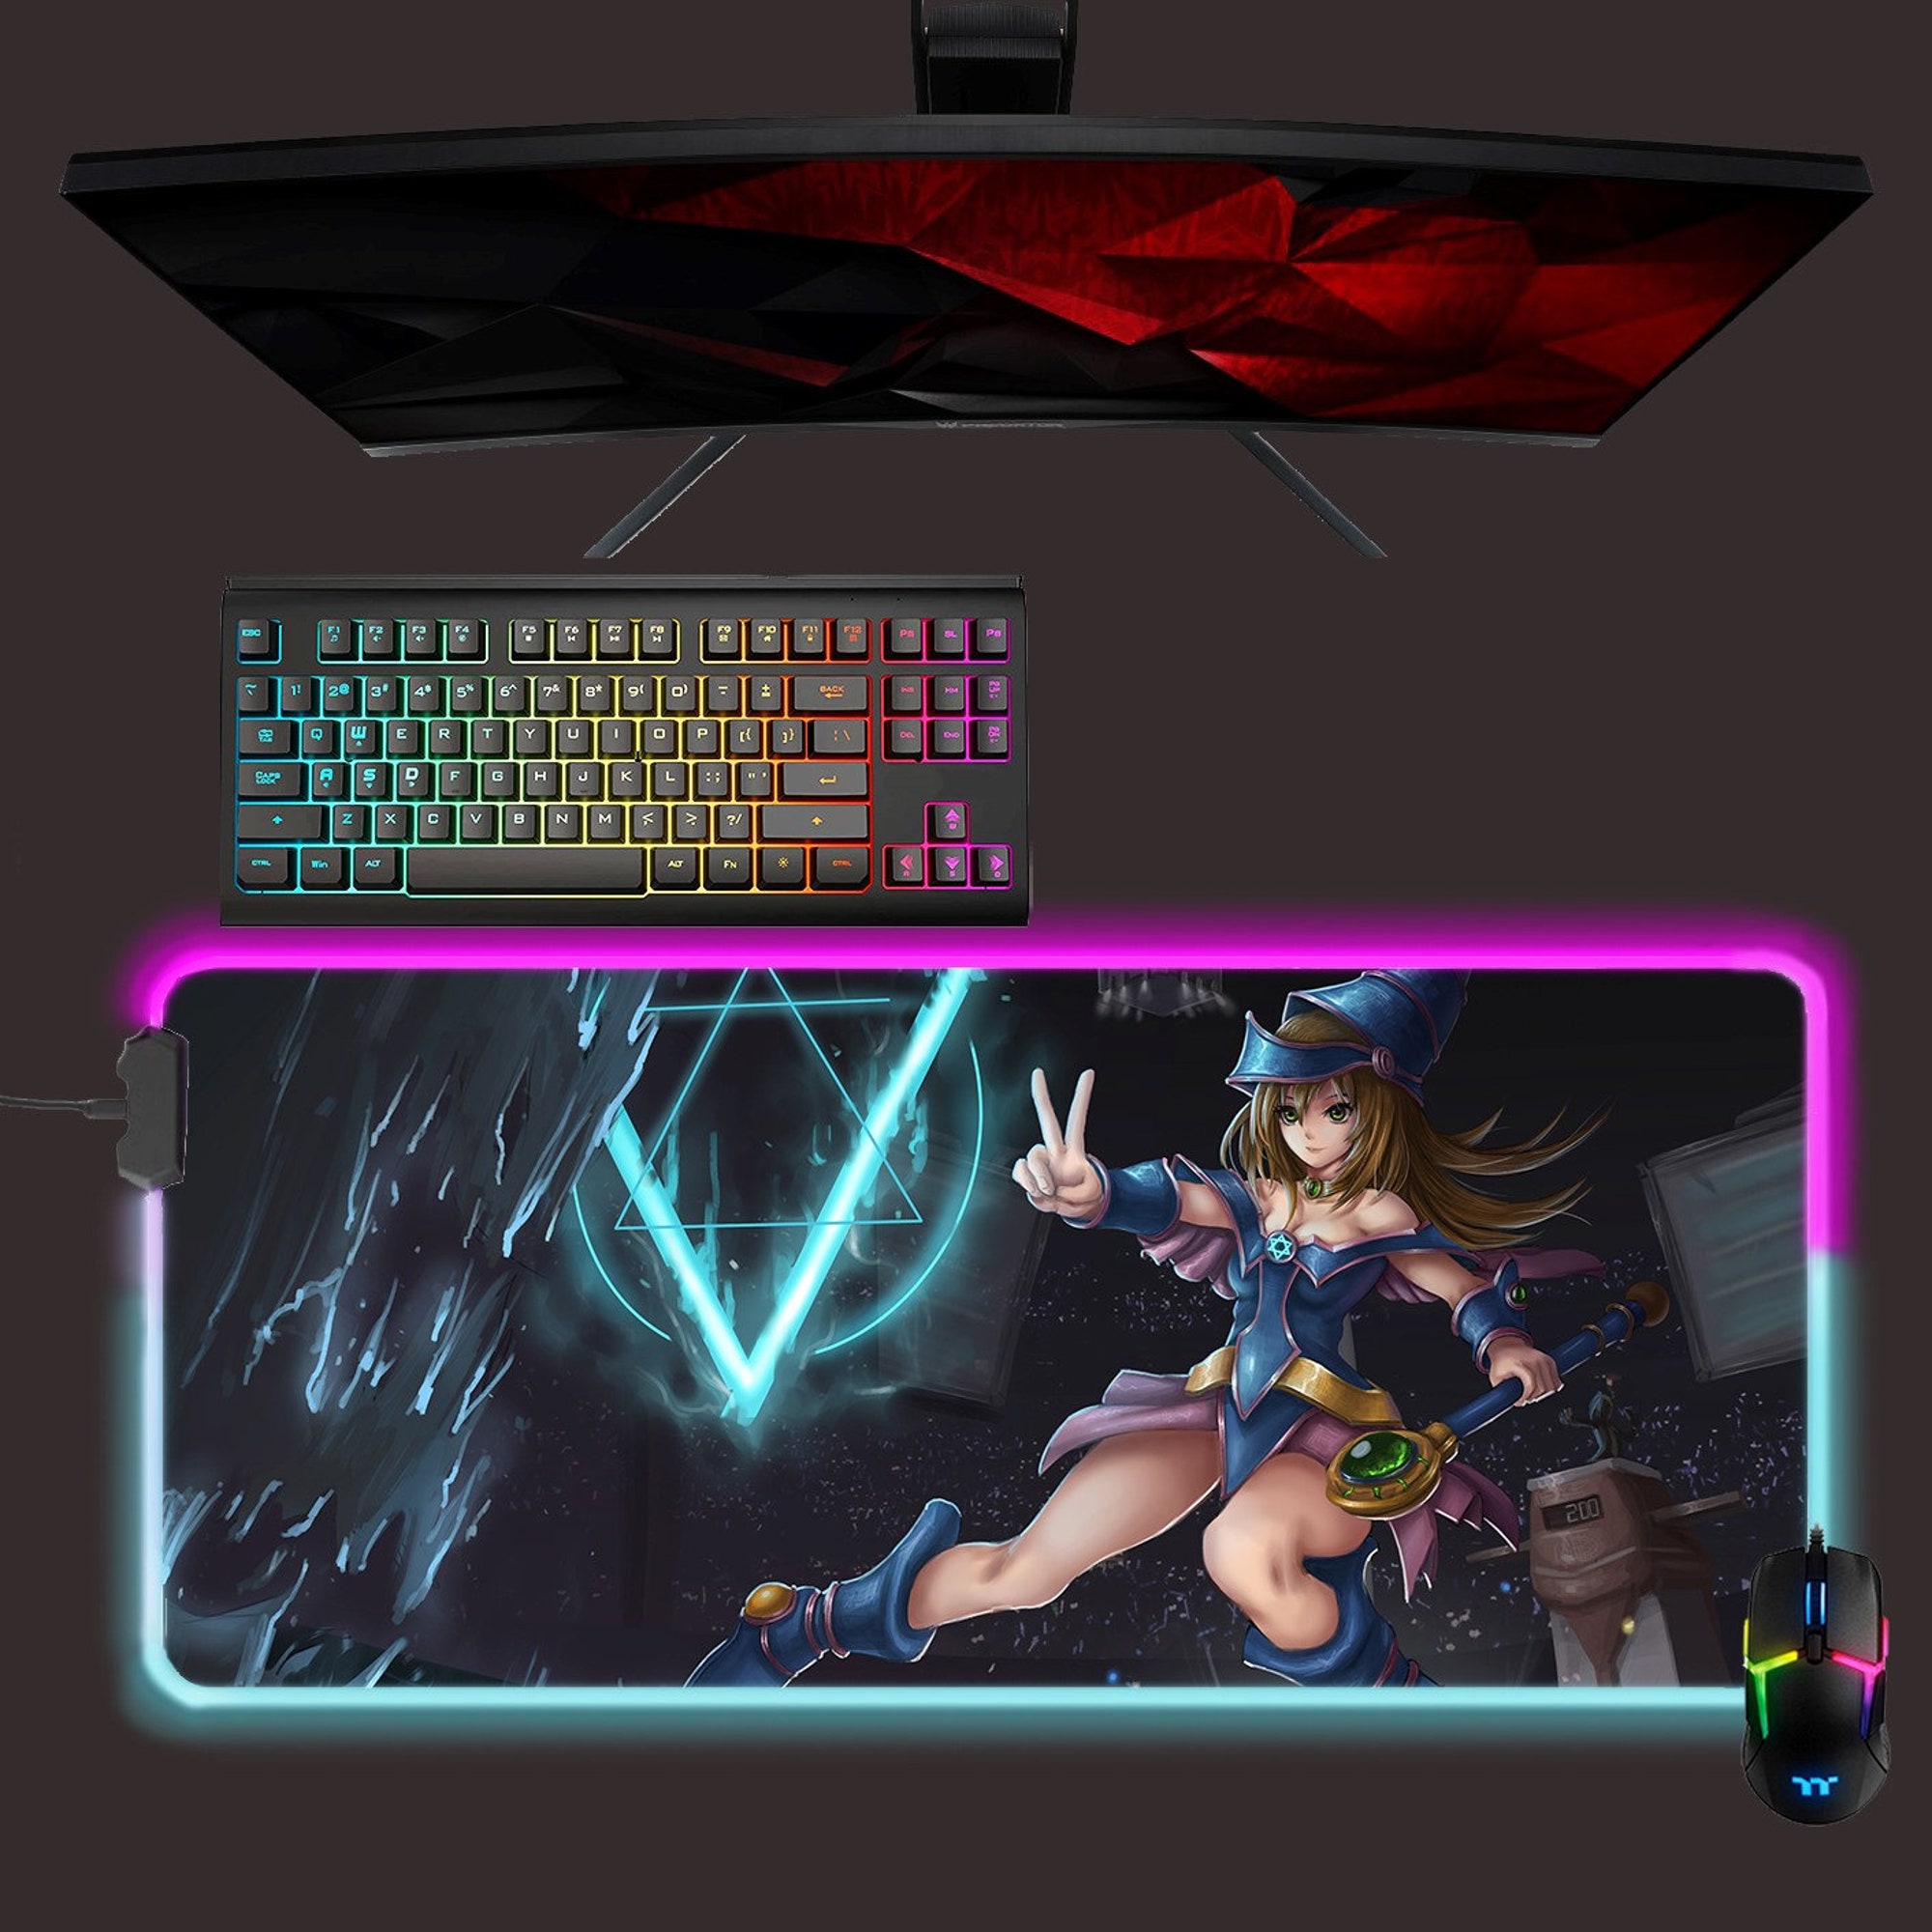 Yu-Gi-Oh led mouse mat, Dark Magician Girl rgb mouse pad, gaming mouse pad, desk mat, gift for gamer